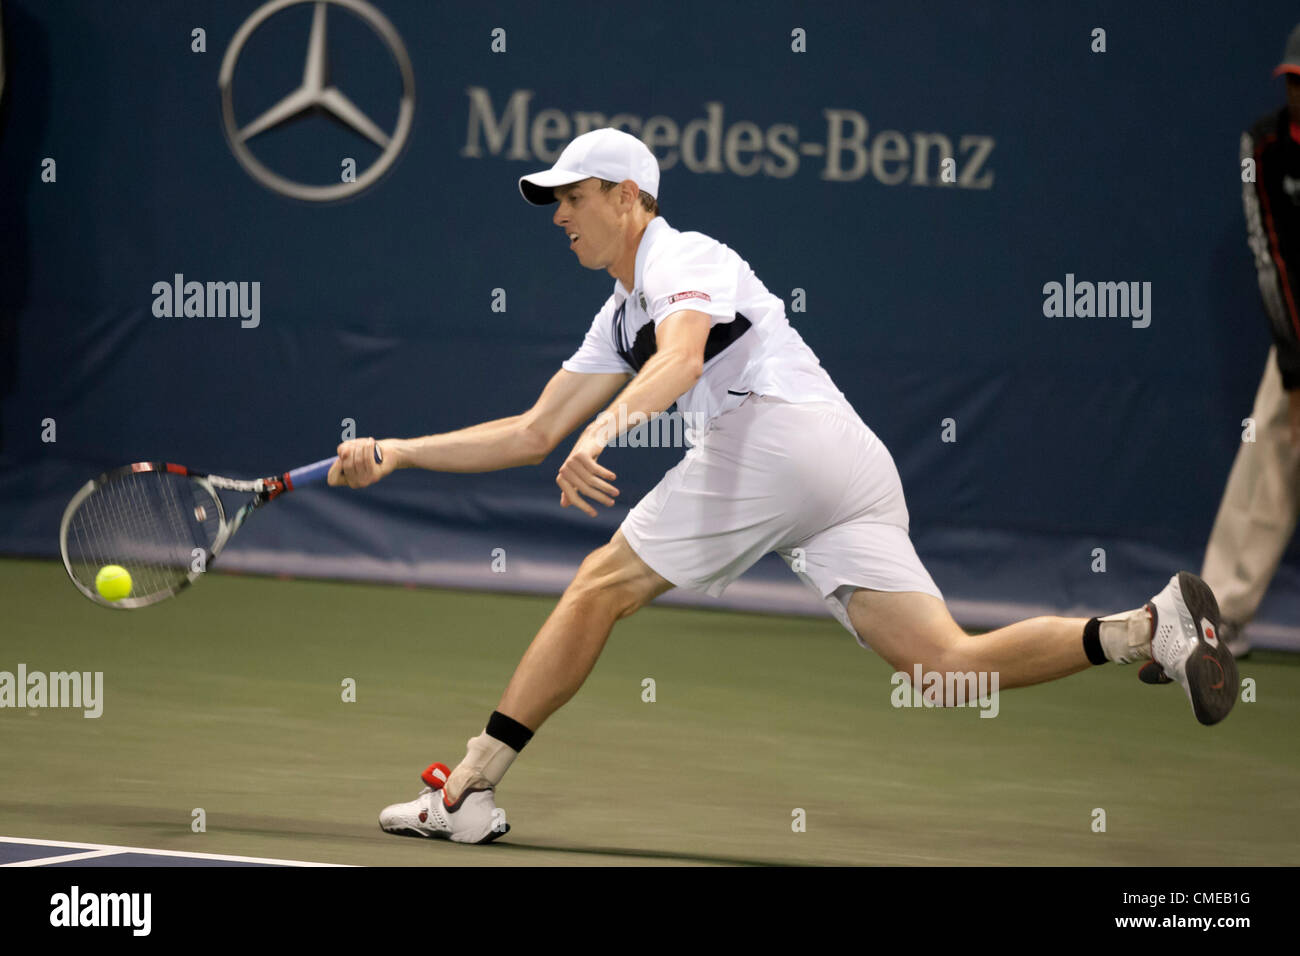 LOS ANGELES, CA - JULY 28: Sam Querrey in action during Day 6 of the Farmers Classic presented by Mercedes-Benz at the LA Tennis Center on July 28, 2012 in Los Angeles, California. Stock Photo